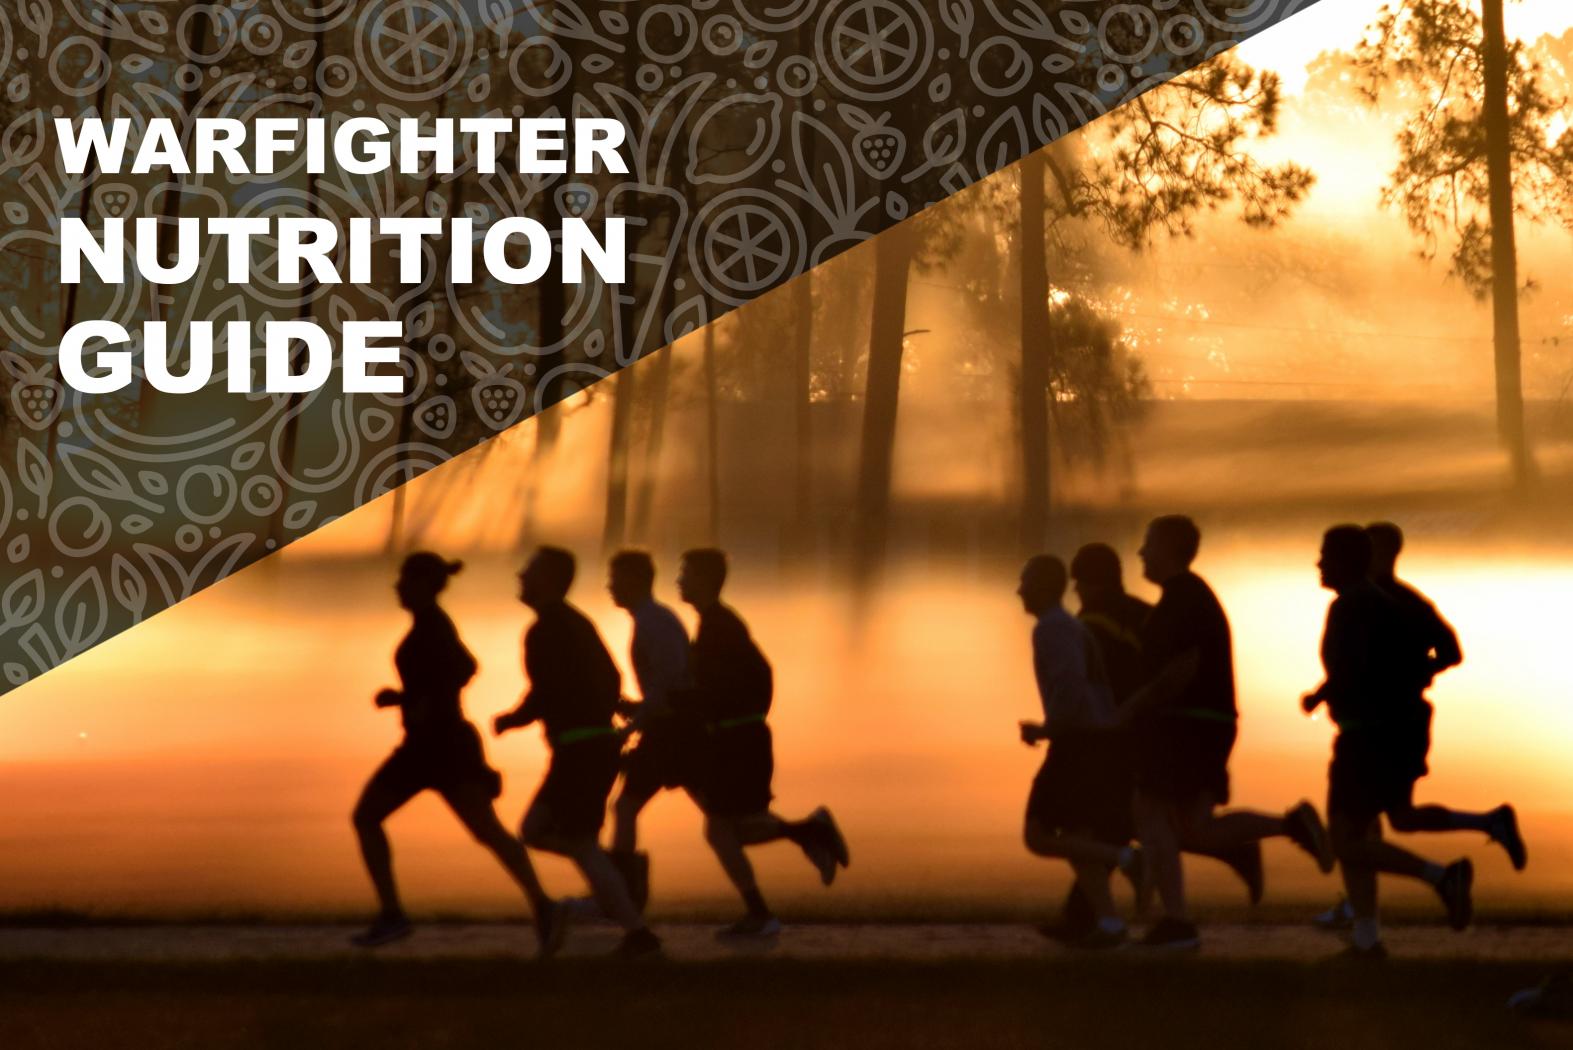 HPRC Warfighter Nutrition Guide. Chapter 5. Silhouette of people running for fitness training at sunrise.